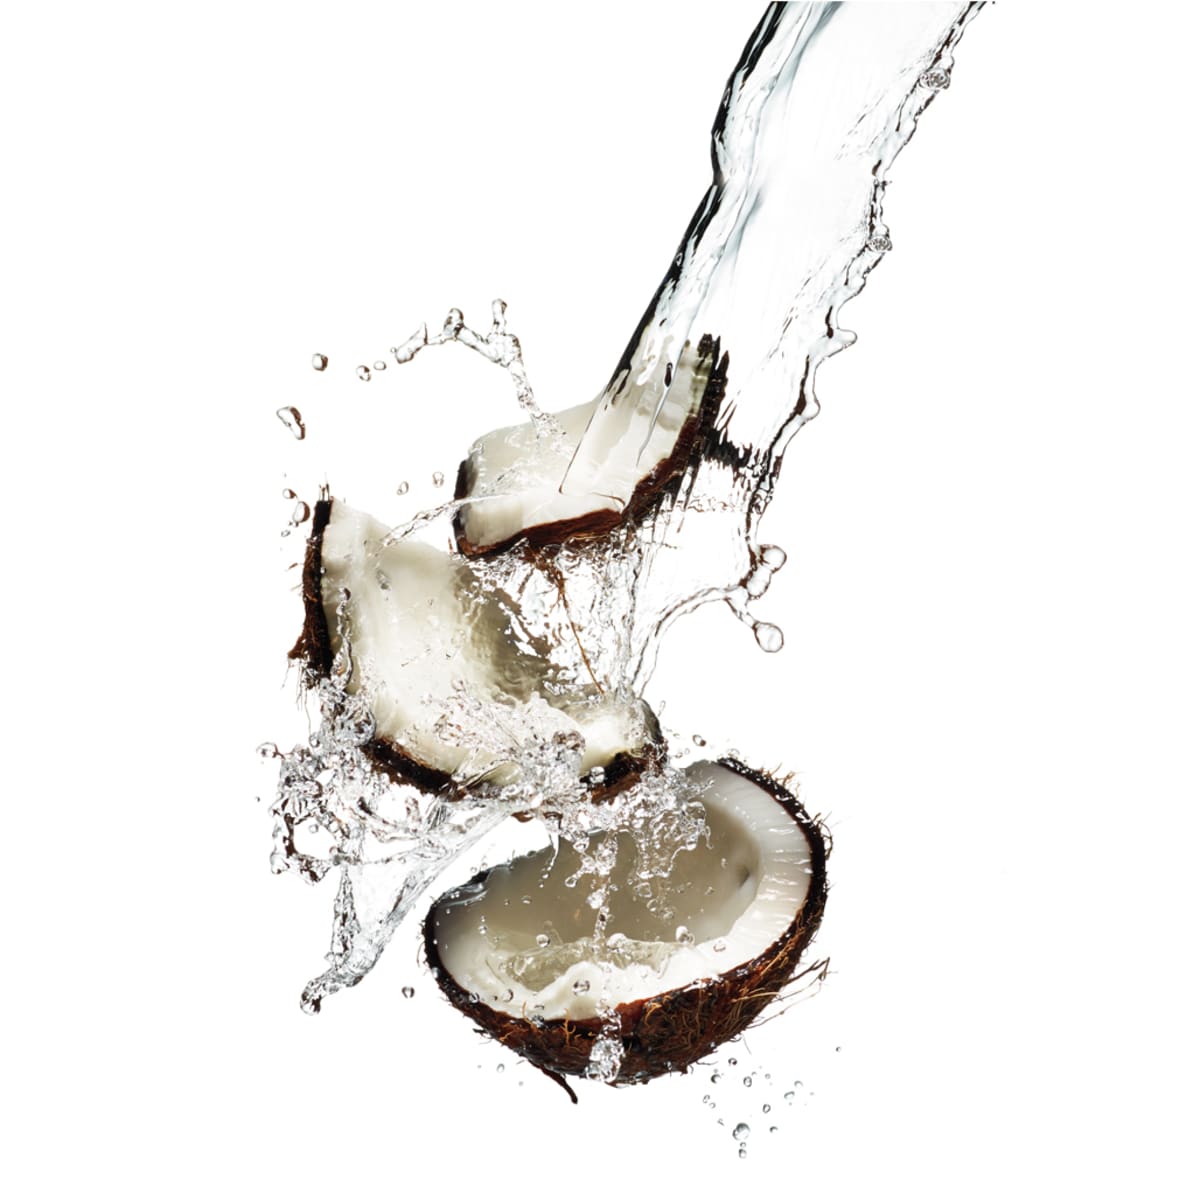 Does coconut oil work on the skin? The truth will surprise you!